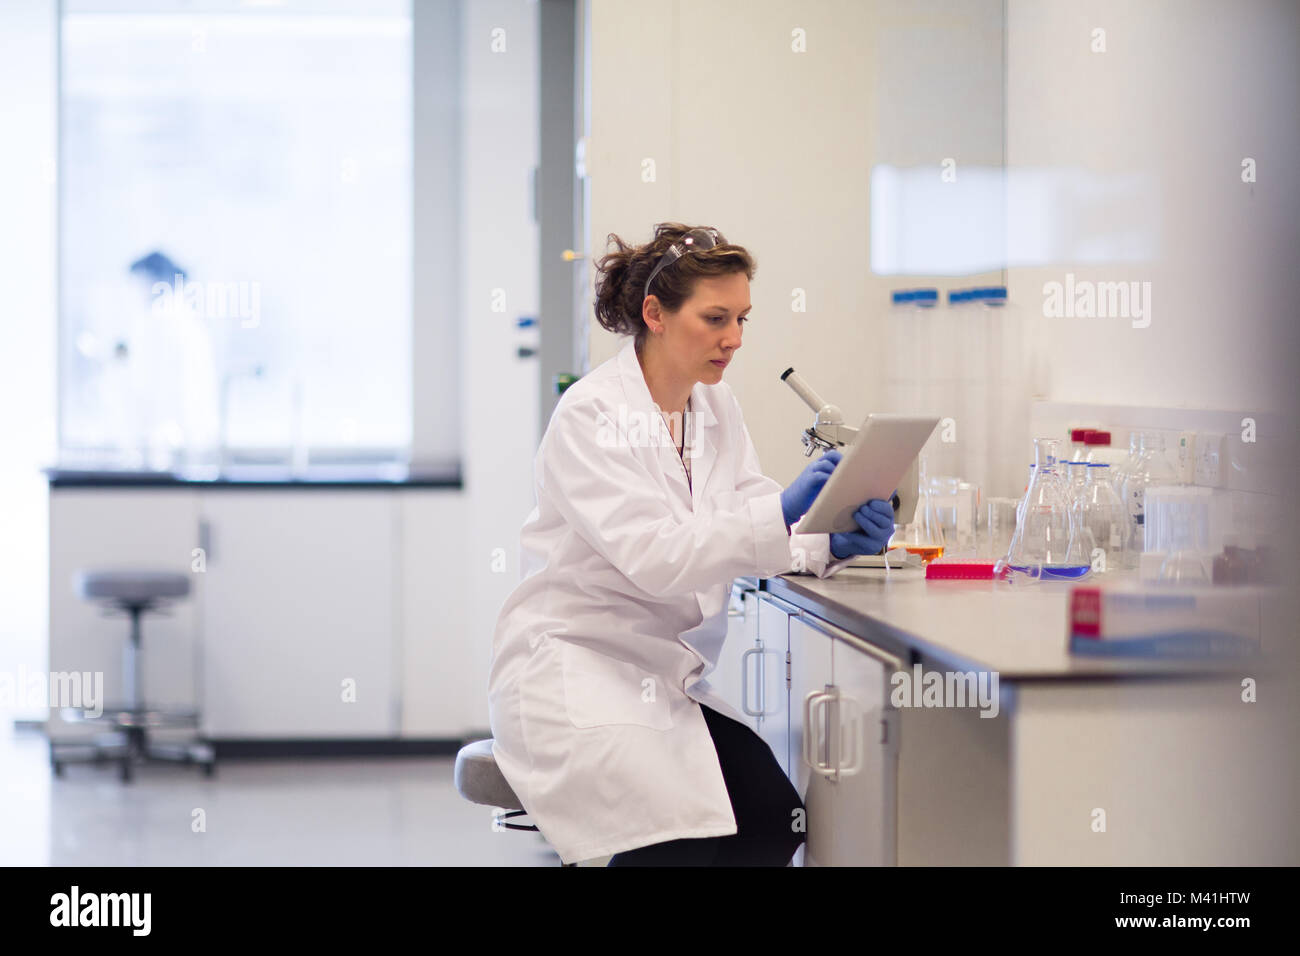 Female scientist looking at results of experiment on digital tablet Stock Photo